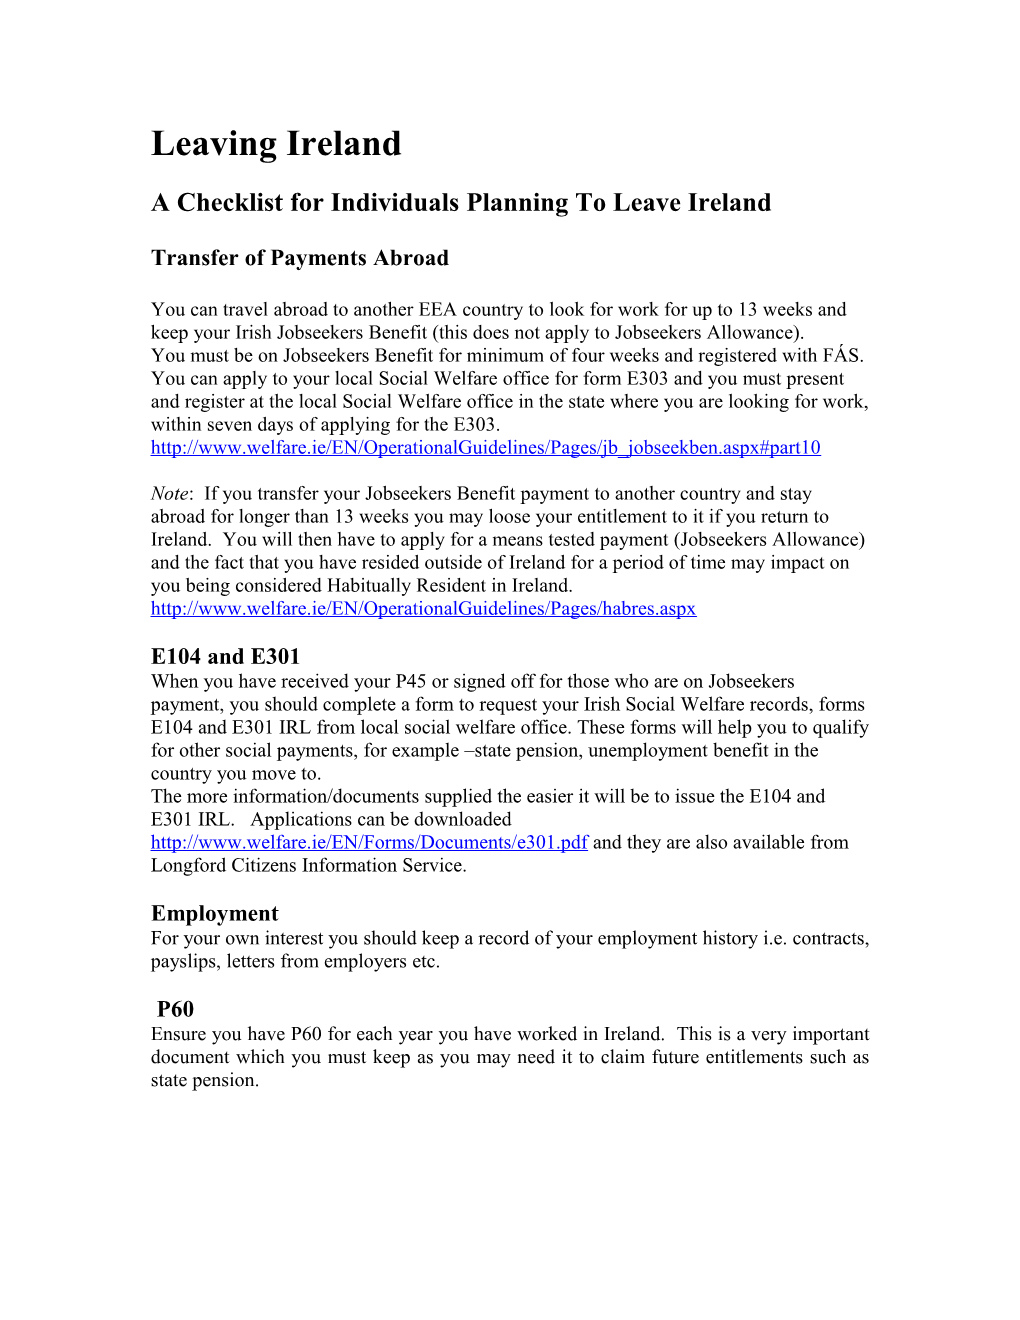 A Checklist for Individuals Planning to Leave Ireland